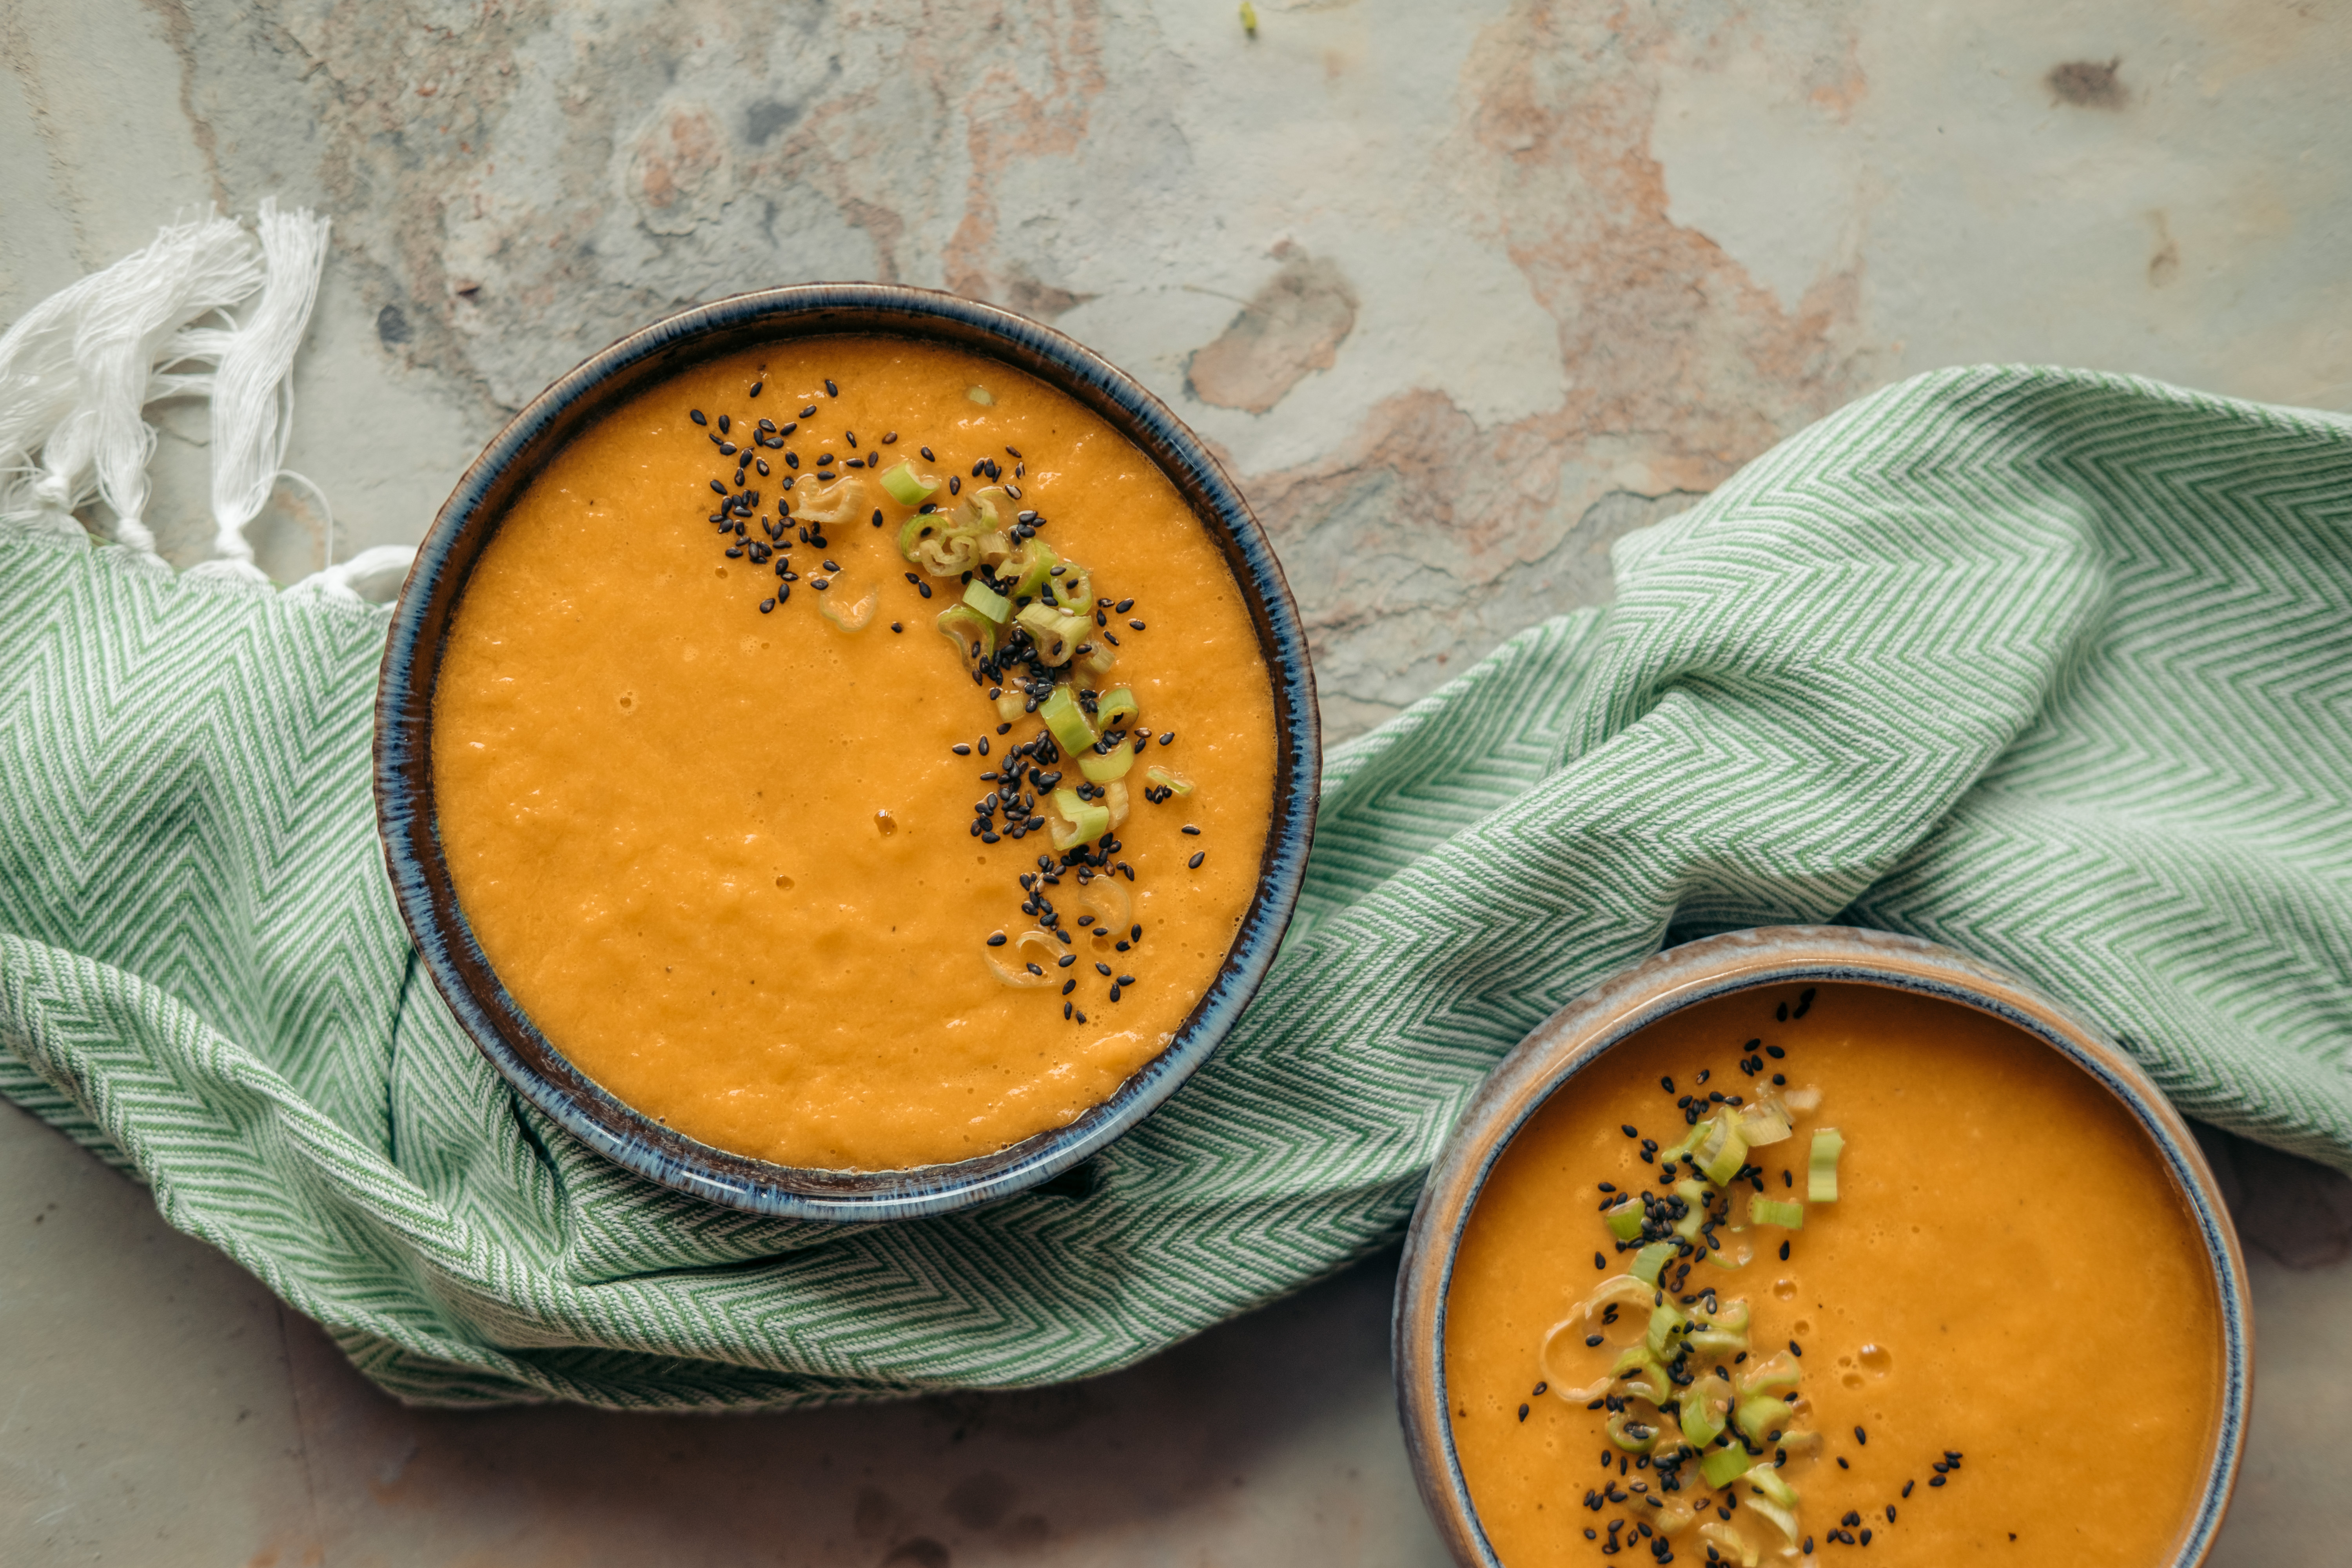 https://www.yuzubakes.com/sites/yuzubakes.com/files/featured-images/fresh-carrot-ginger-soup-served-in-nordic-bowls.jpg